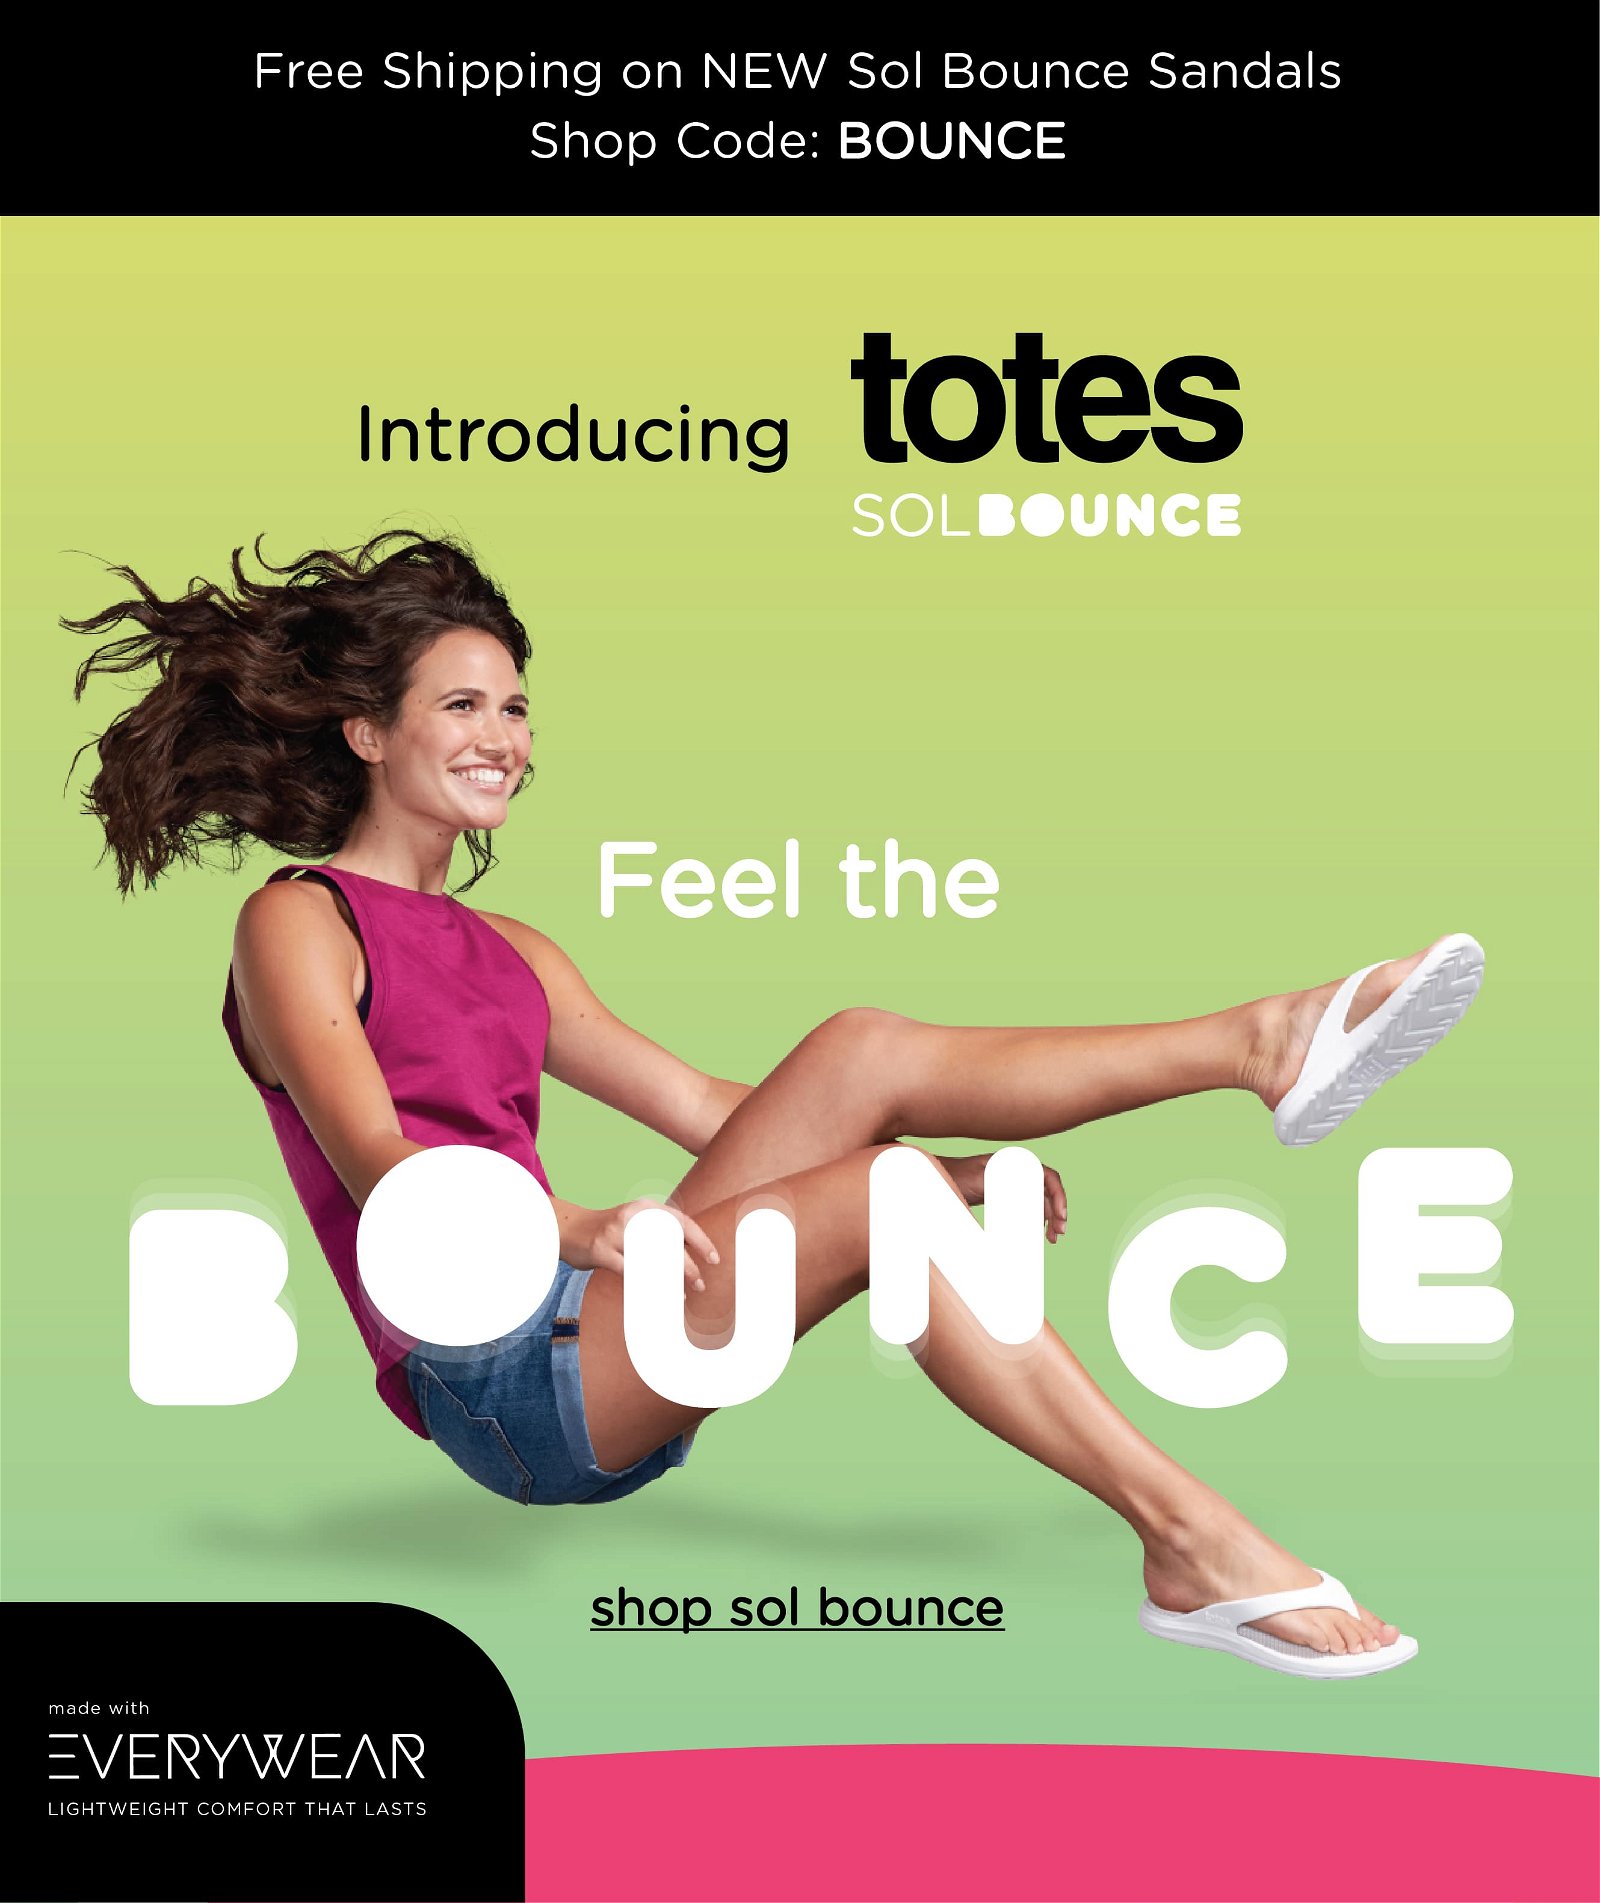 totes: The NEW Sol Bounce Sandals: Weightless Durable Comfort